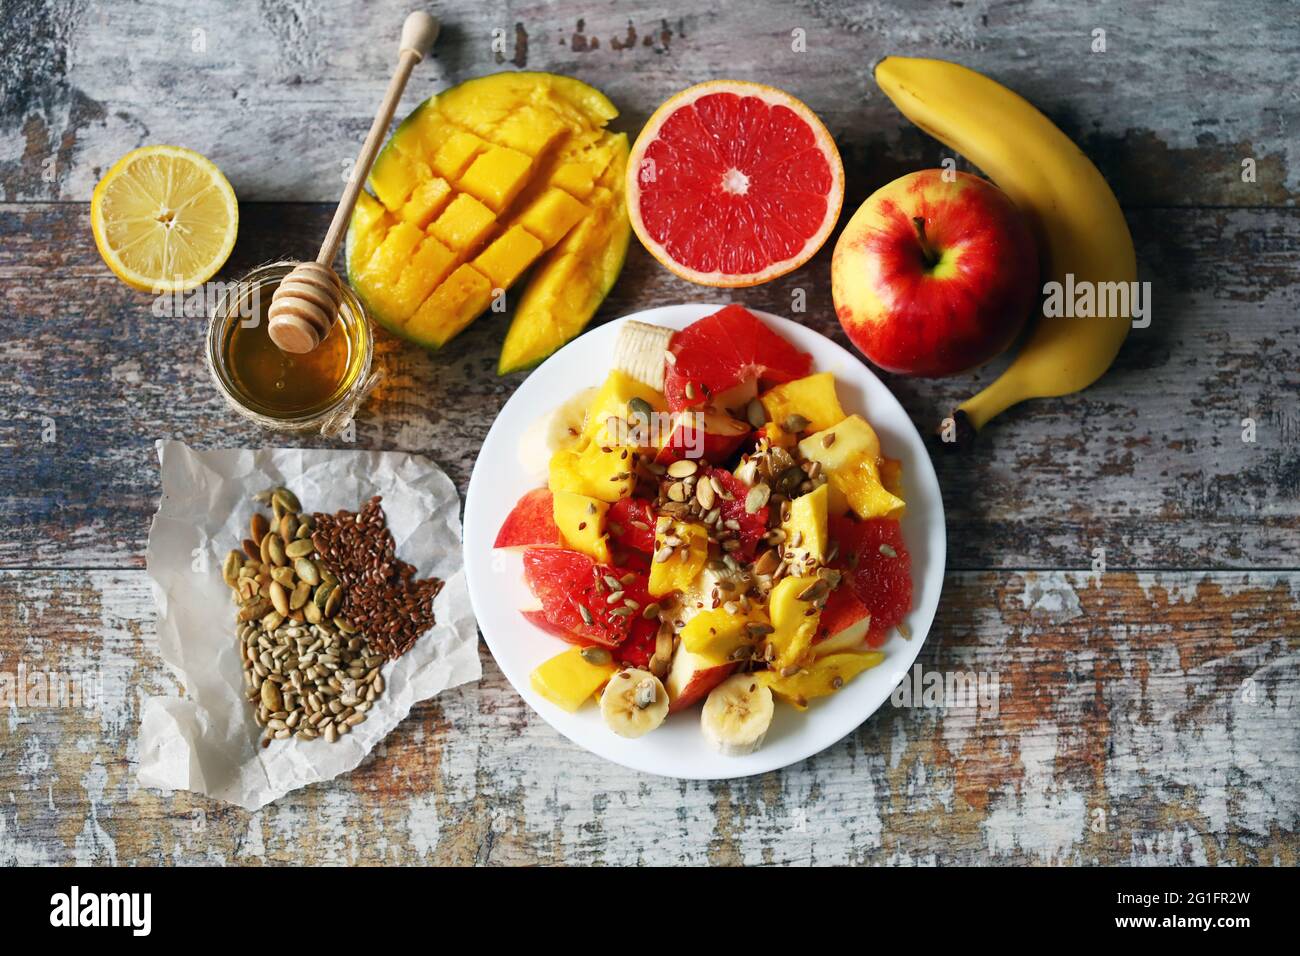 Super fresh nutritious fruit salad with seeds. Salad with mango, banana and grapefruit. Vitamin food. Healthy food. Stock Photo